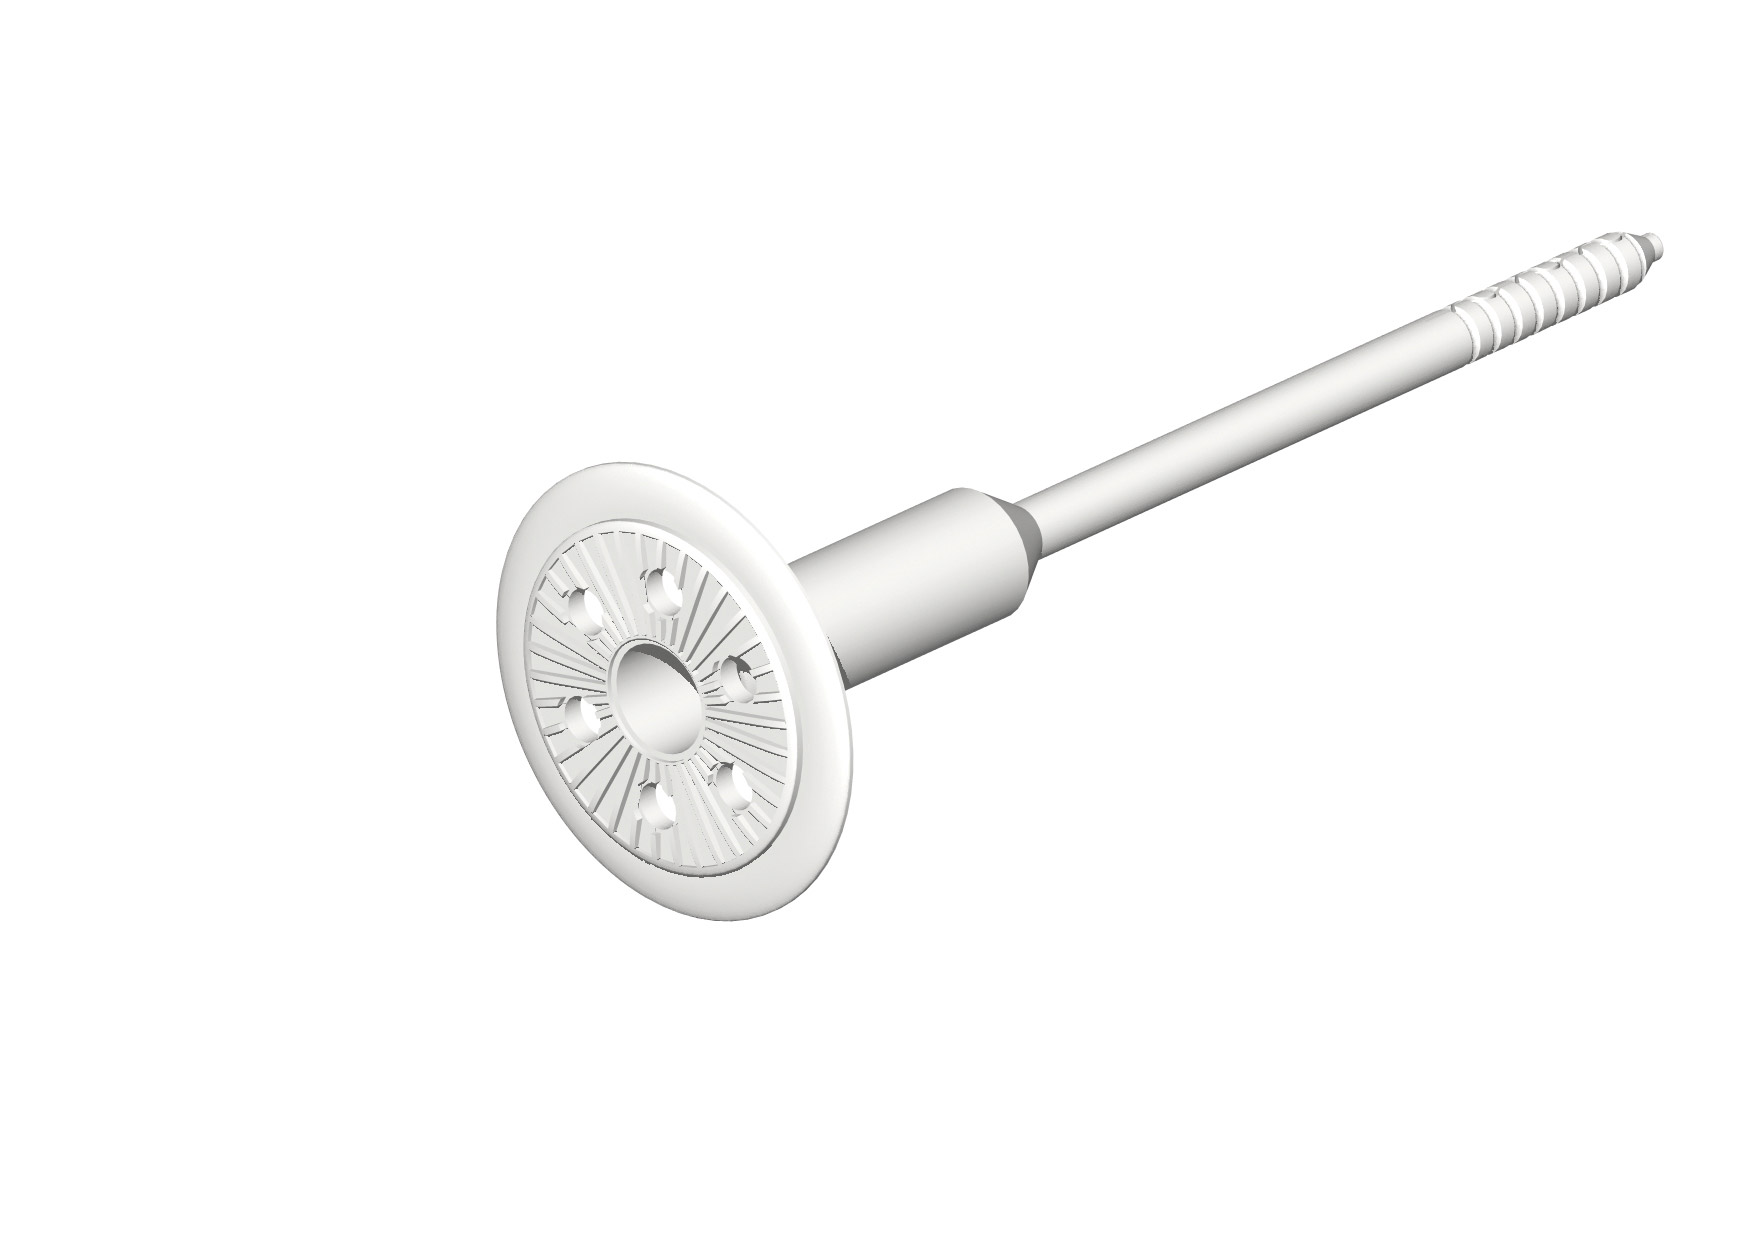 FASSA TOP FIX 2G: Screw anchor for fixing insulating panels in ETICS systems